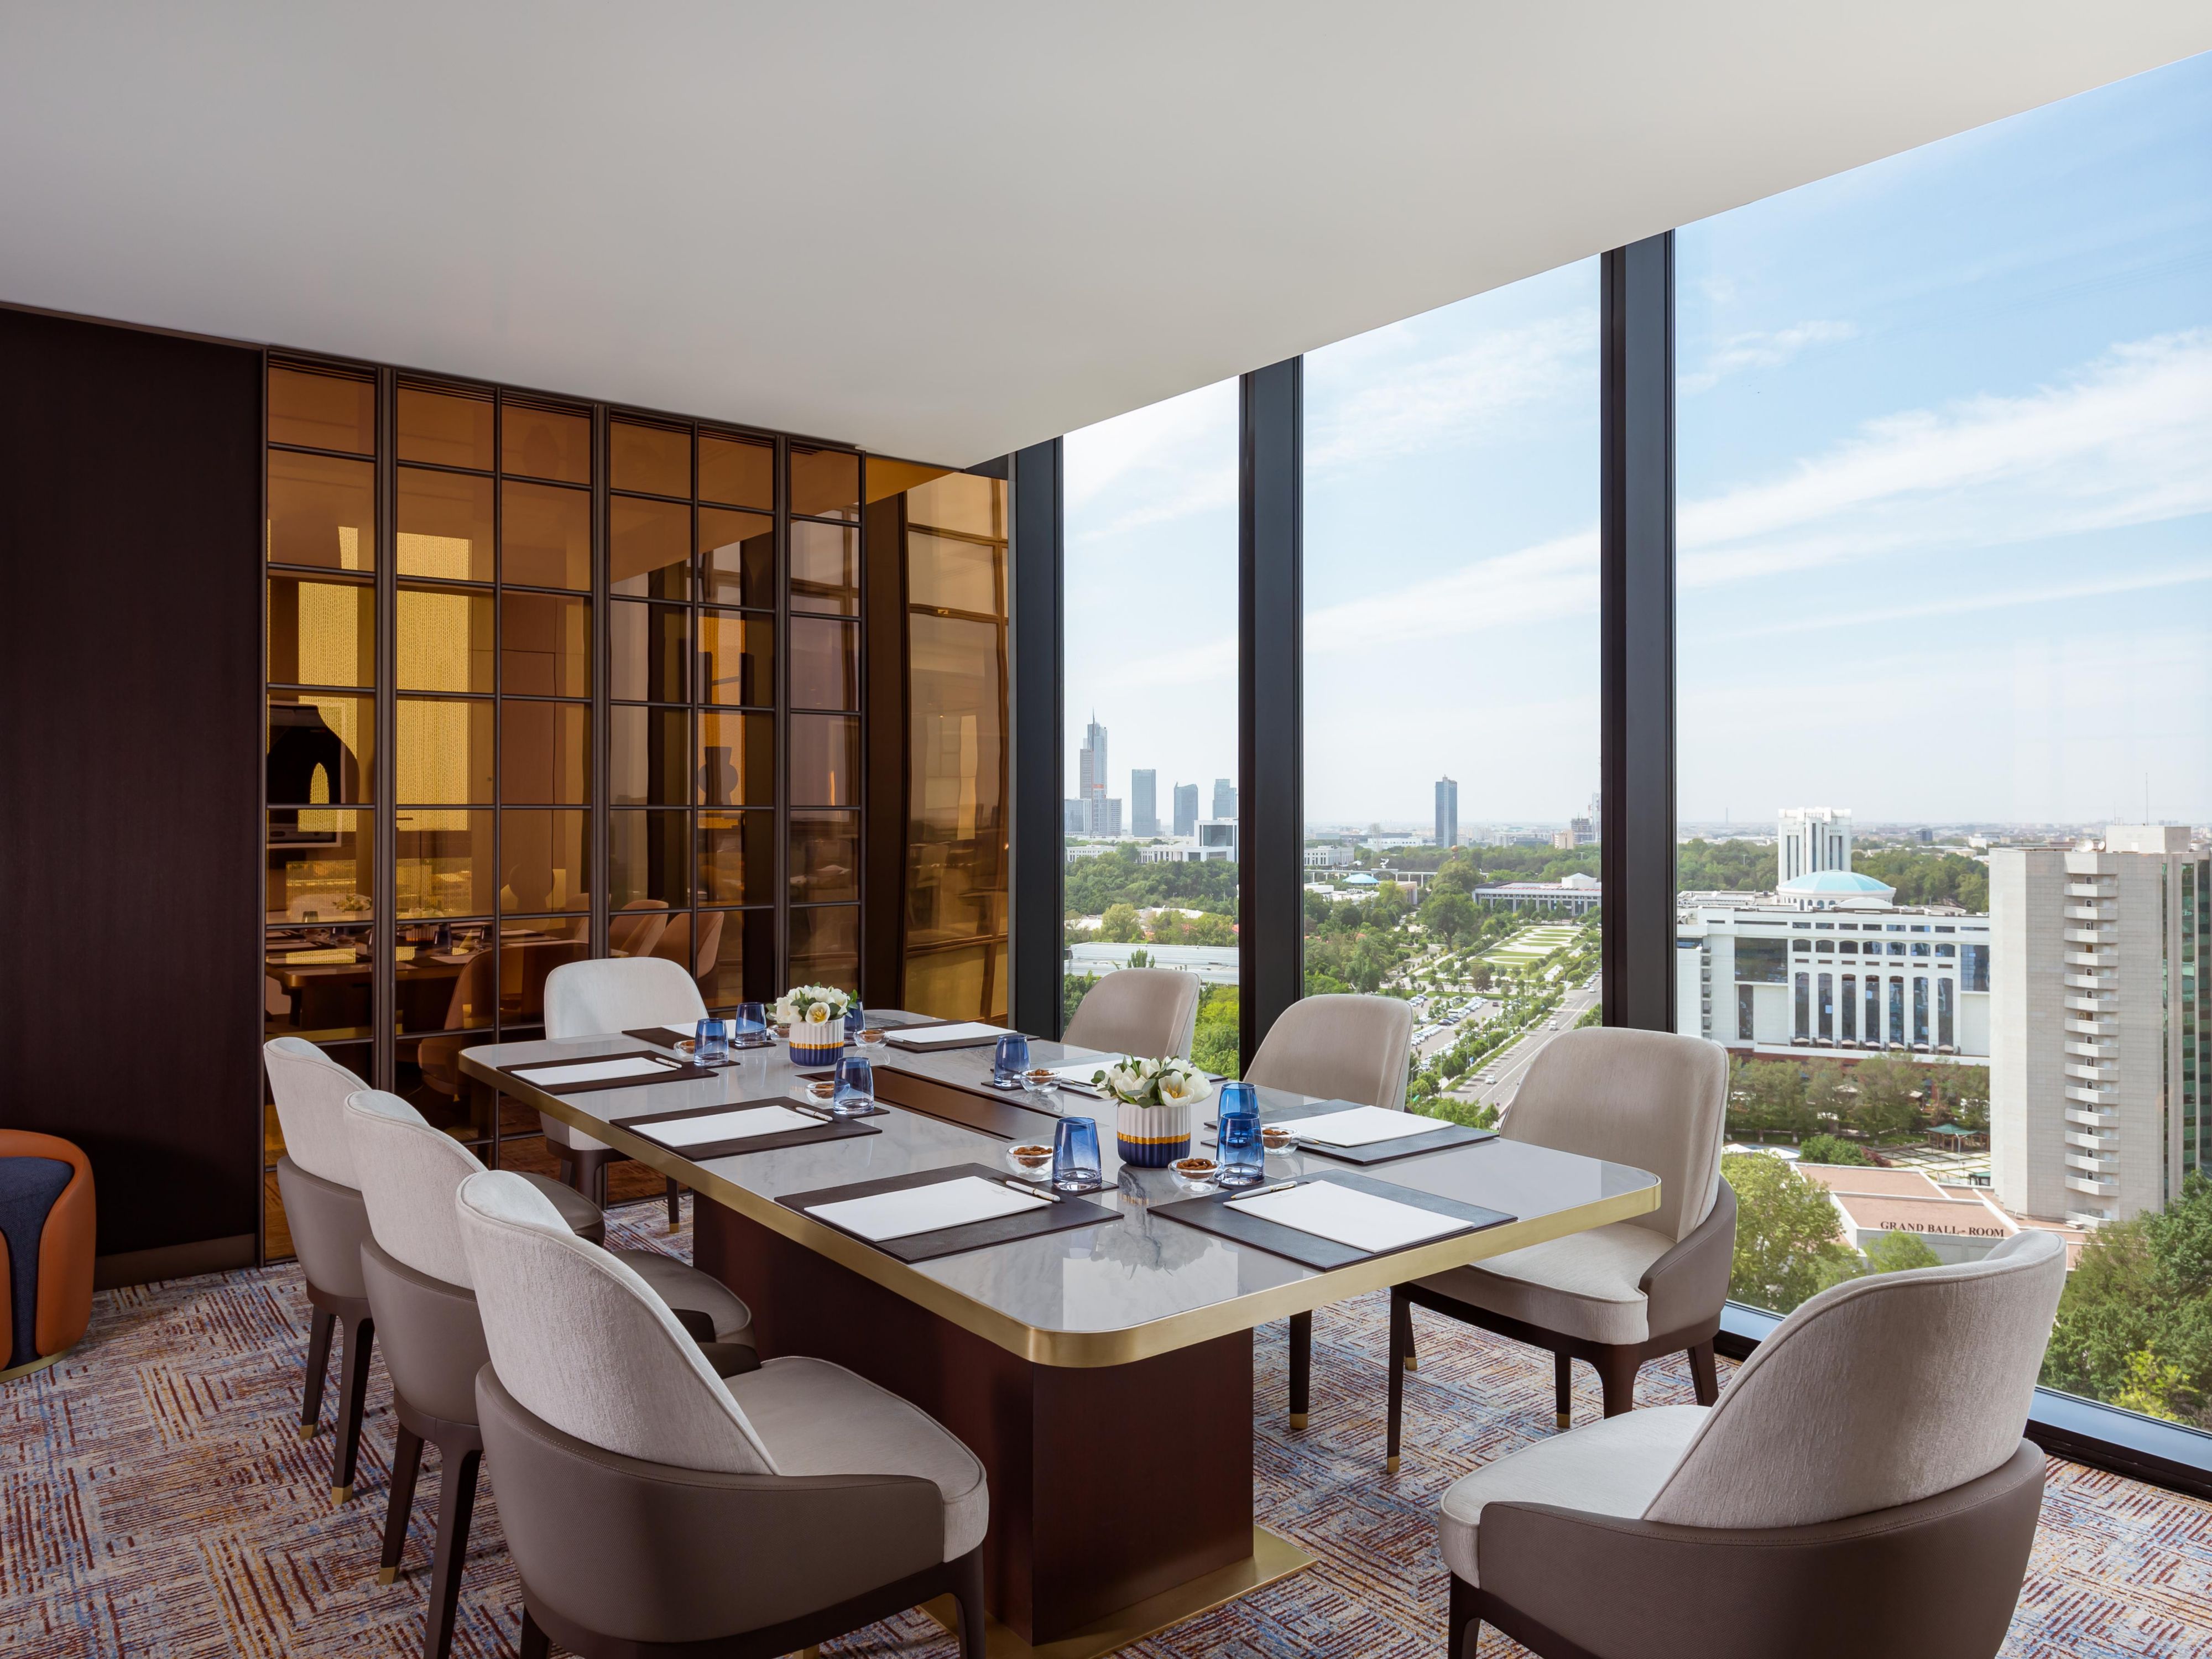 For executive meetings, enjoy the Boardroom on the 11th floor.